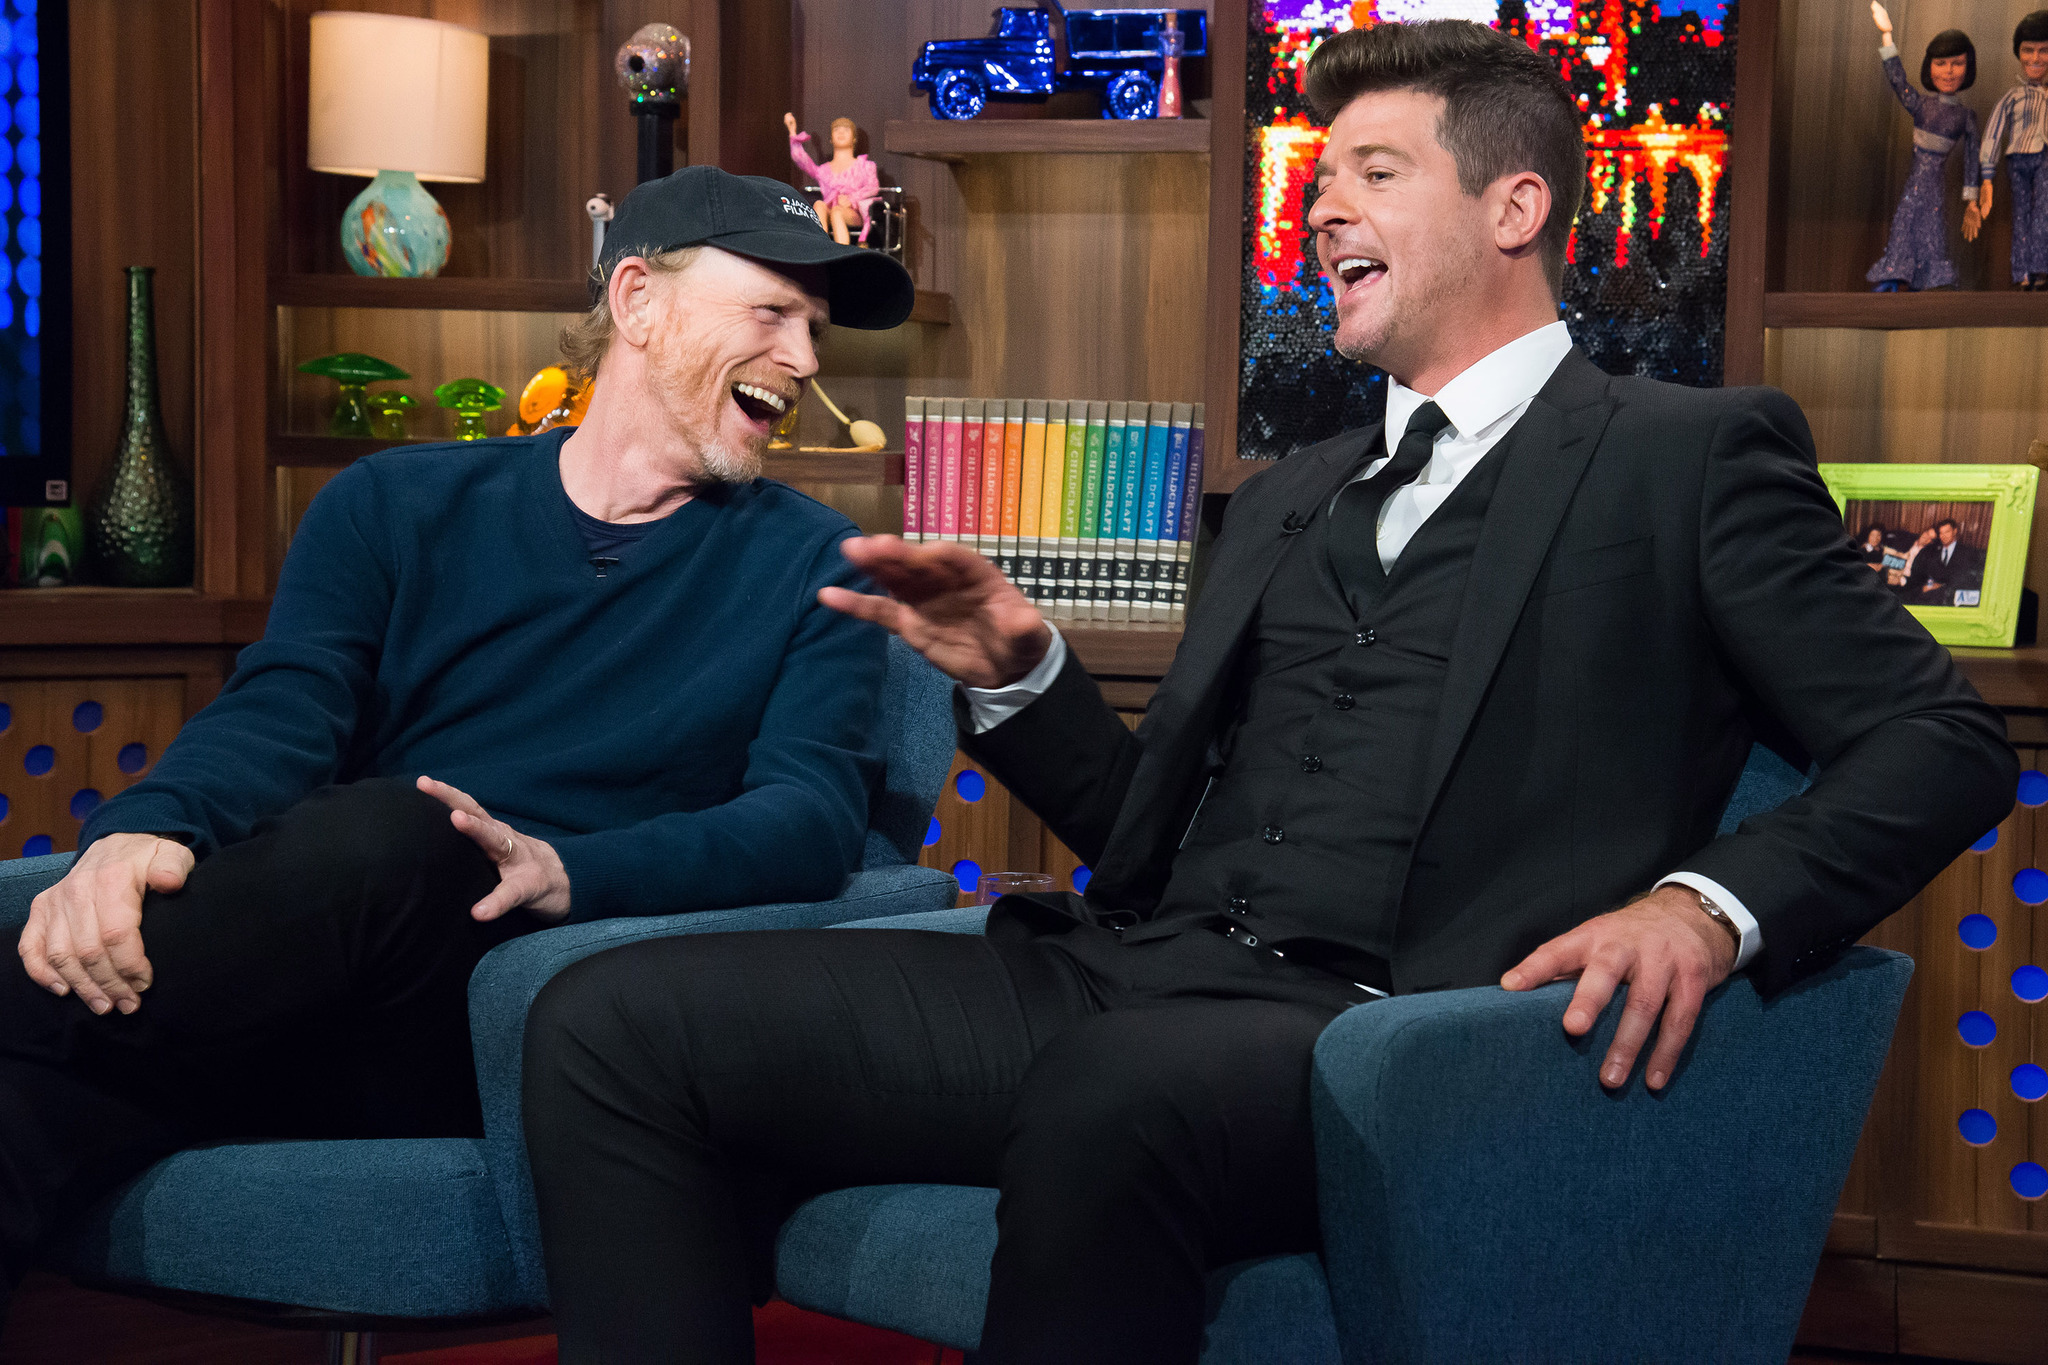 Ron Howard and Robin Thicke